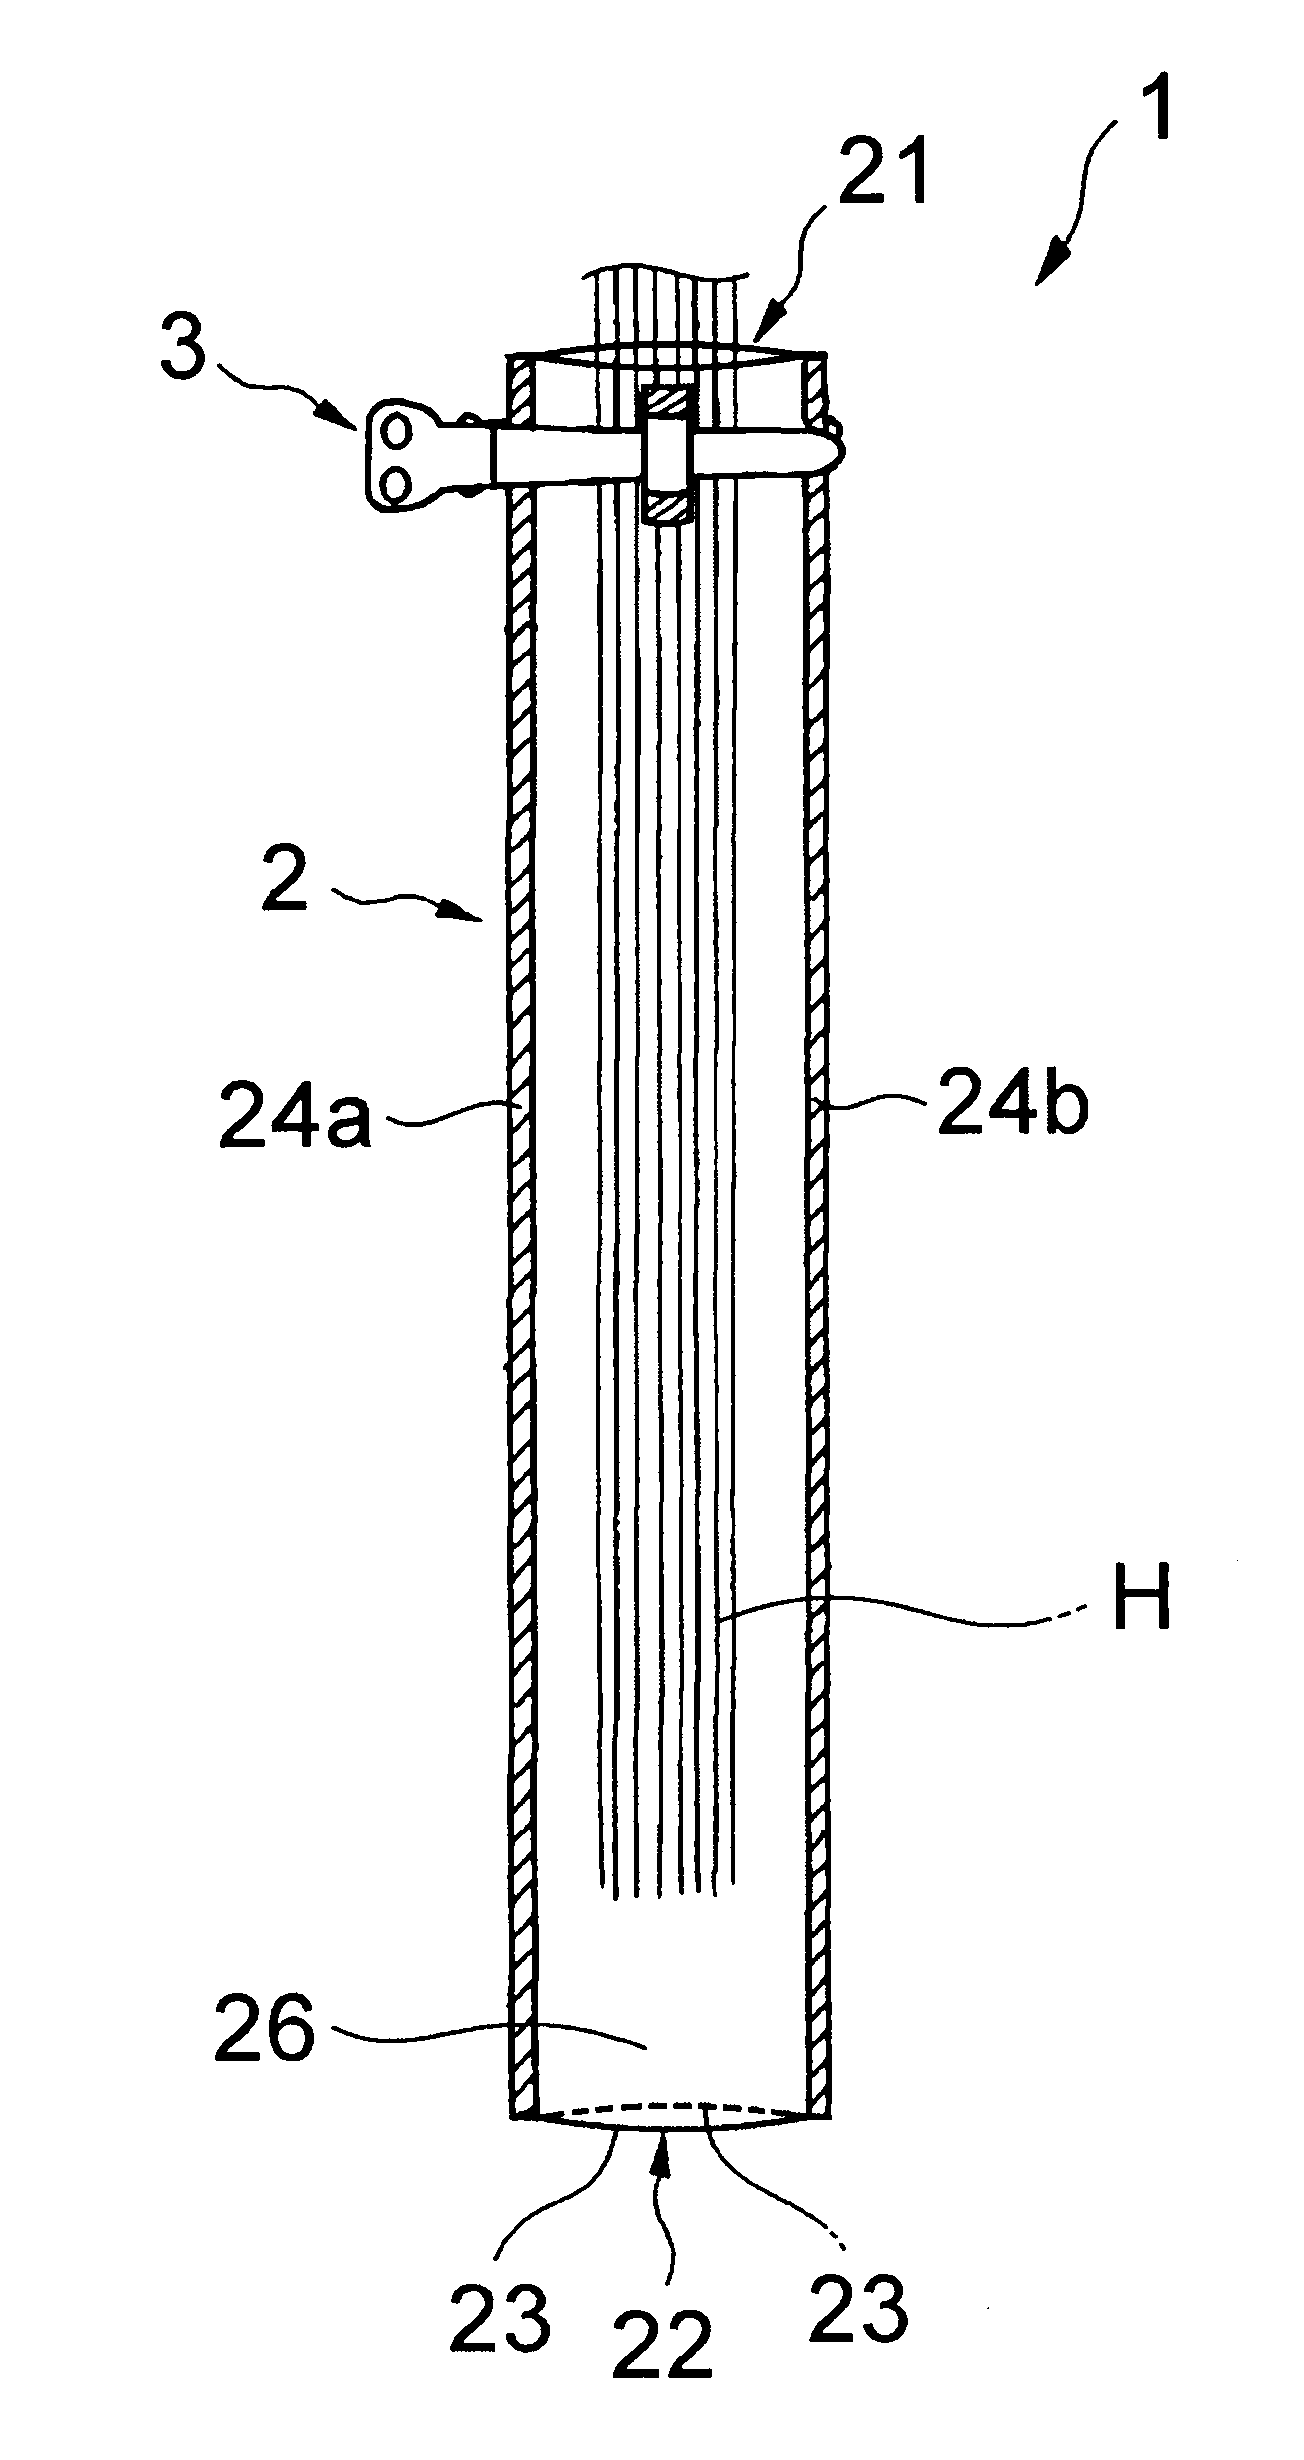 Hair holder, open/close device for hair-holding member, and hair holder for hair treatment